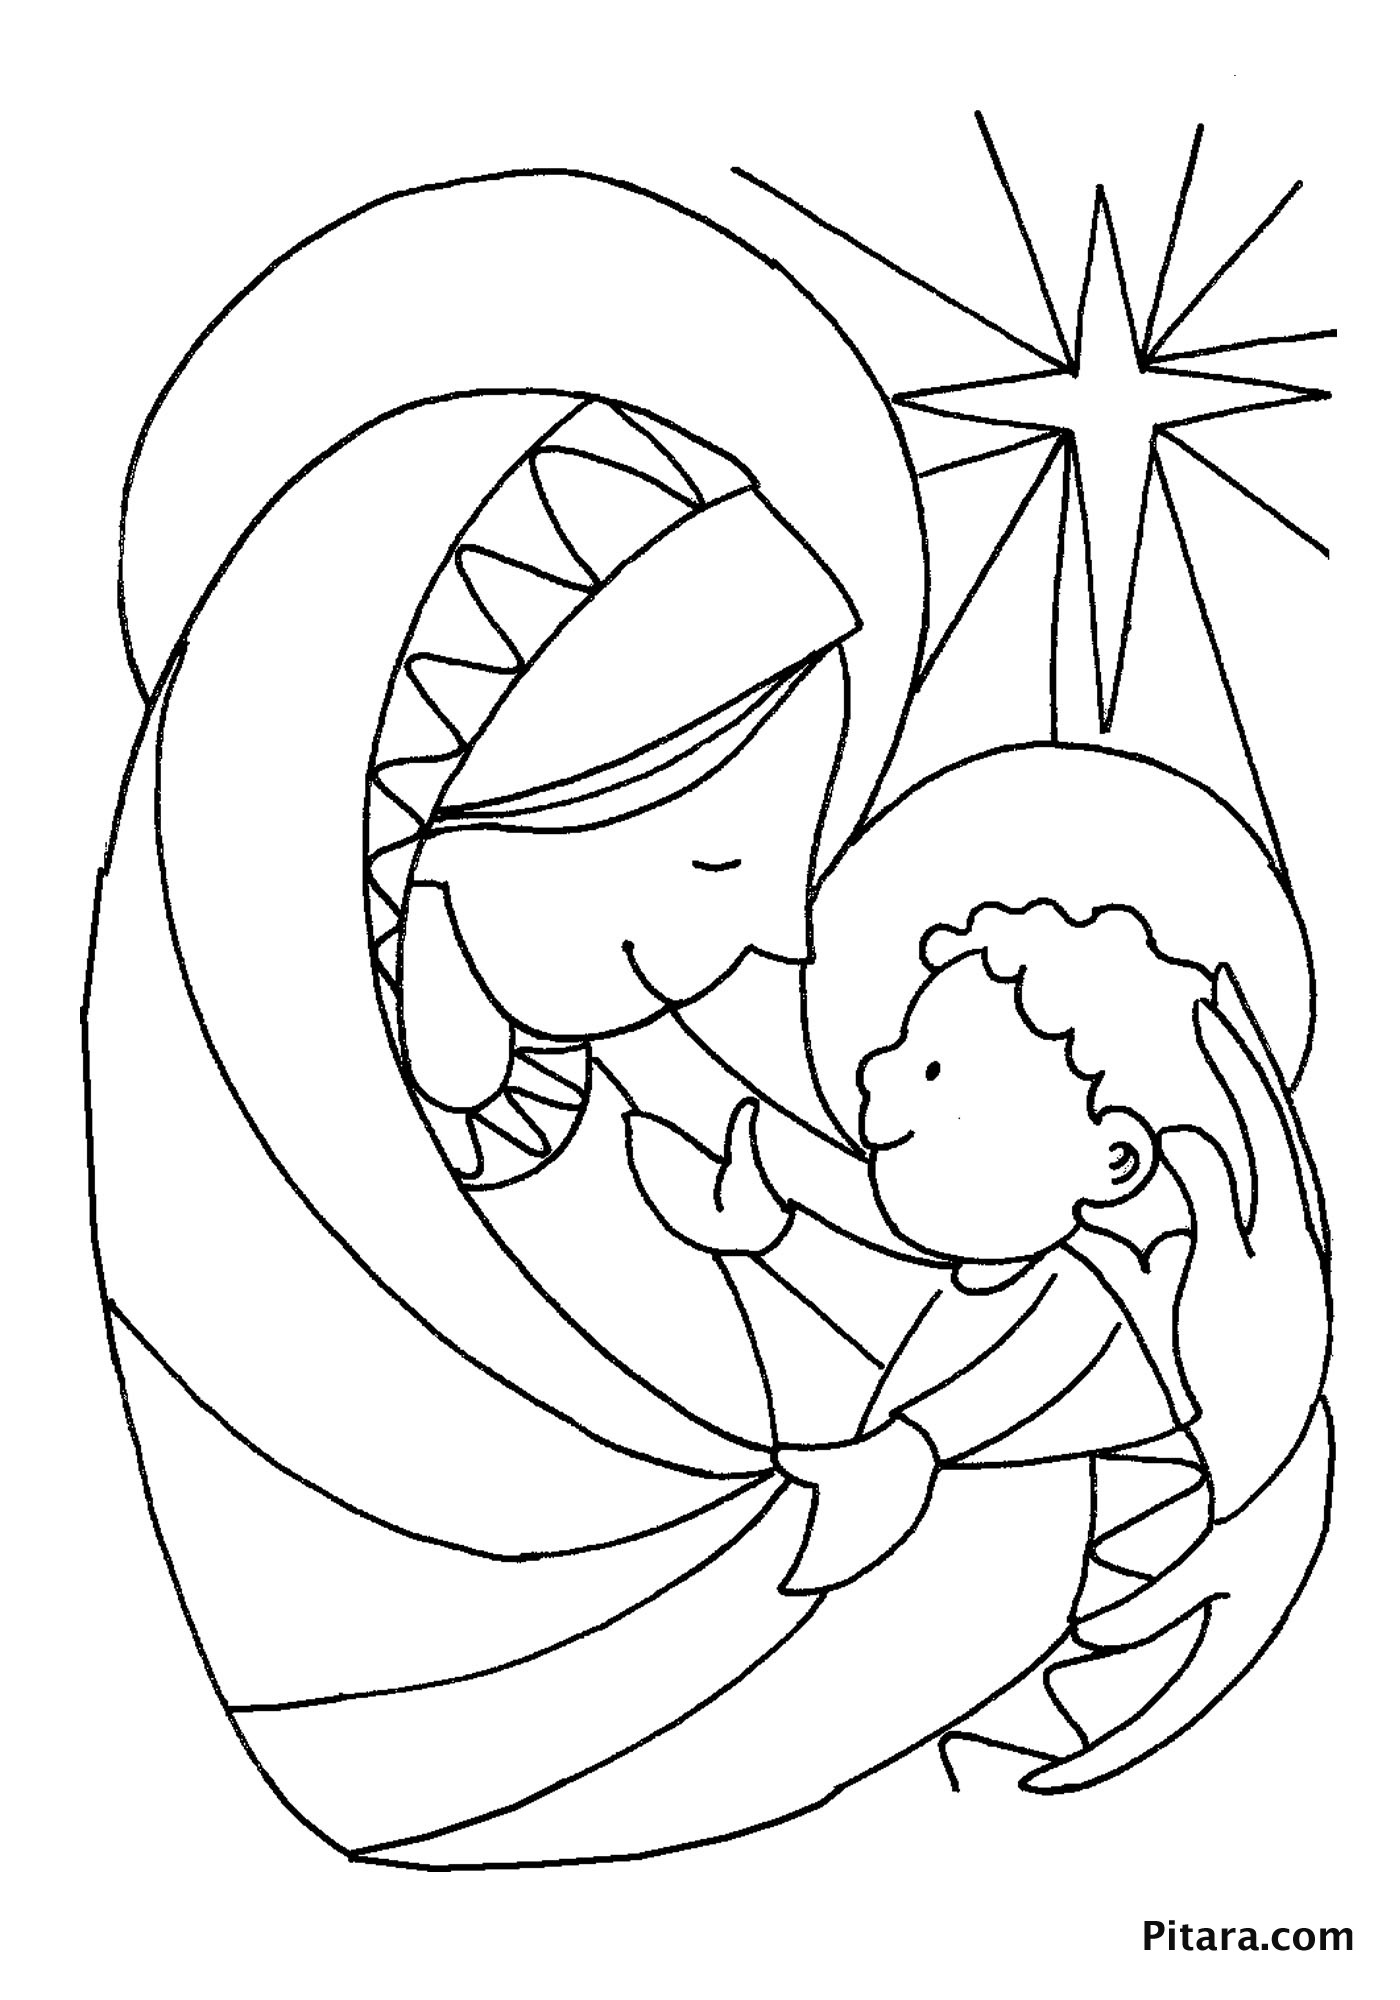 Download Baby Jesus In the Manger Coloring Pages | Top Free ...